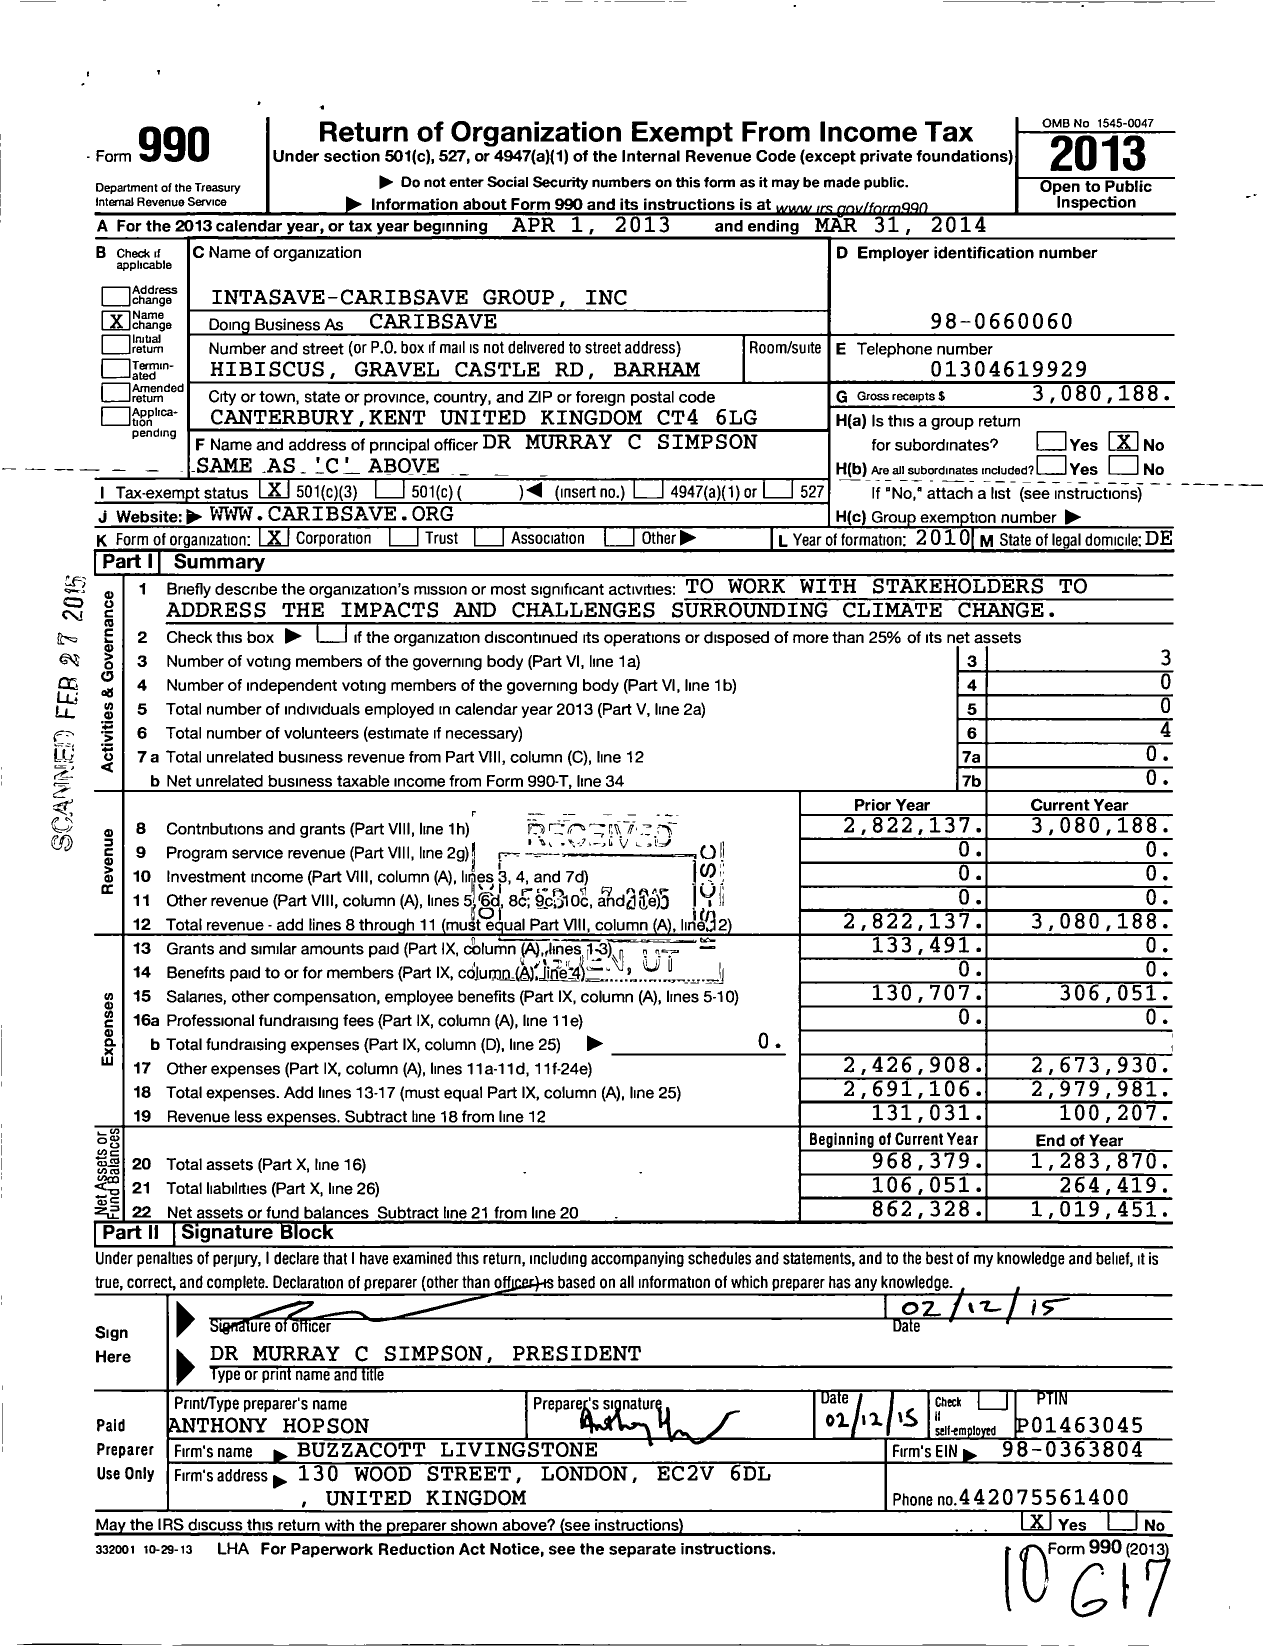 Image of first page of 2013 Form 990 for Intasave Caribsave Group